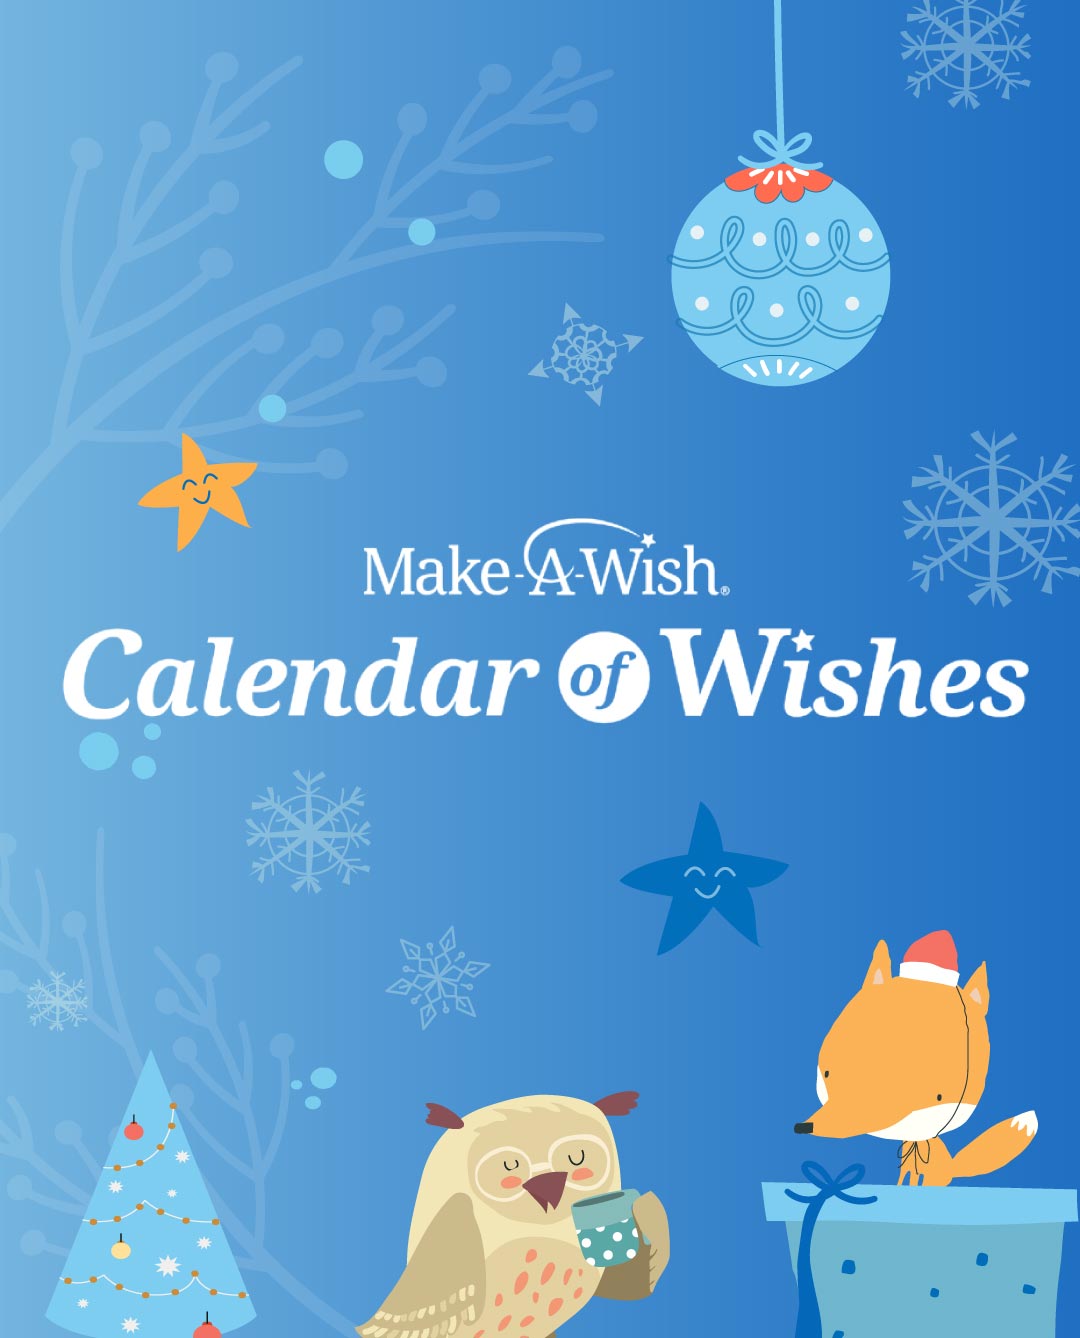 24 days of wishes